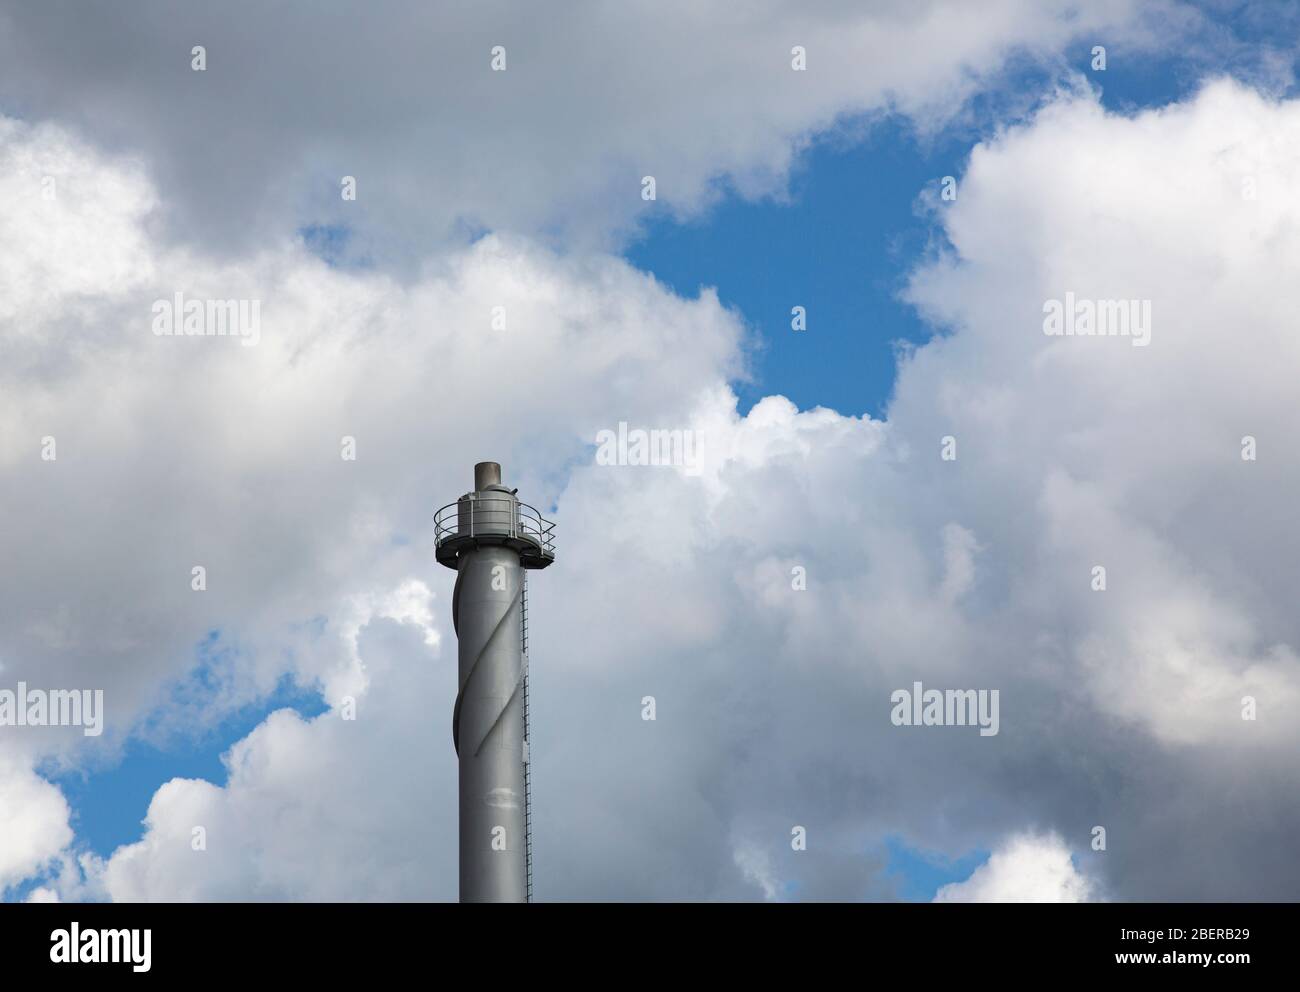 Helical strakes or corkscrew fin  at the top of a district heating power plant steel smokestack prevent vortex shedding , Finland Stock Photo